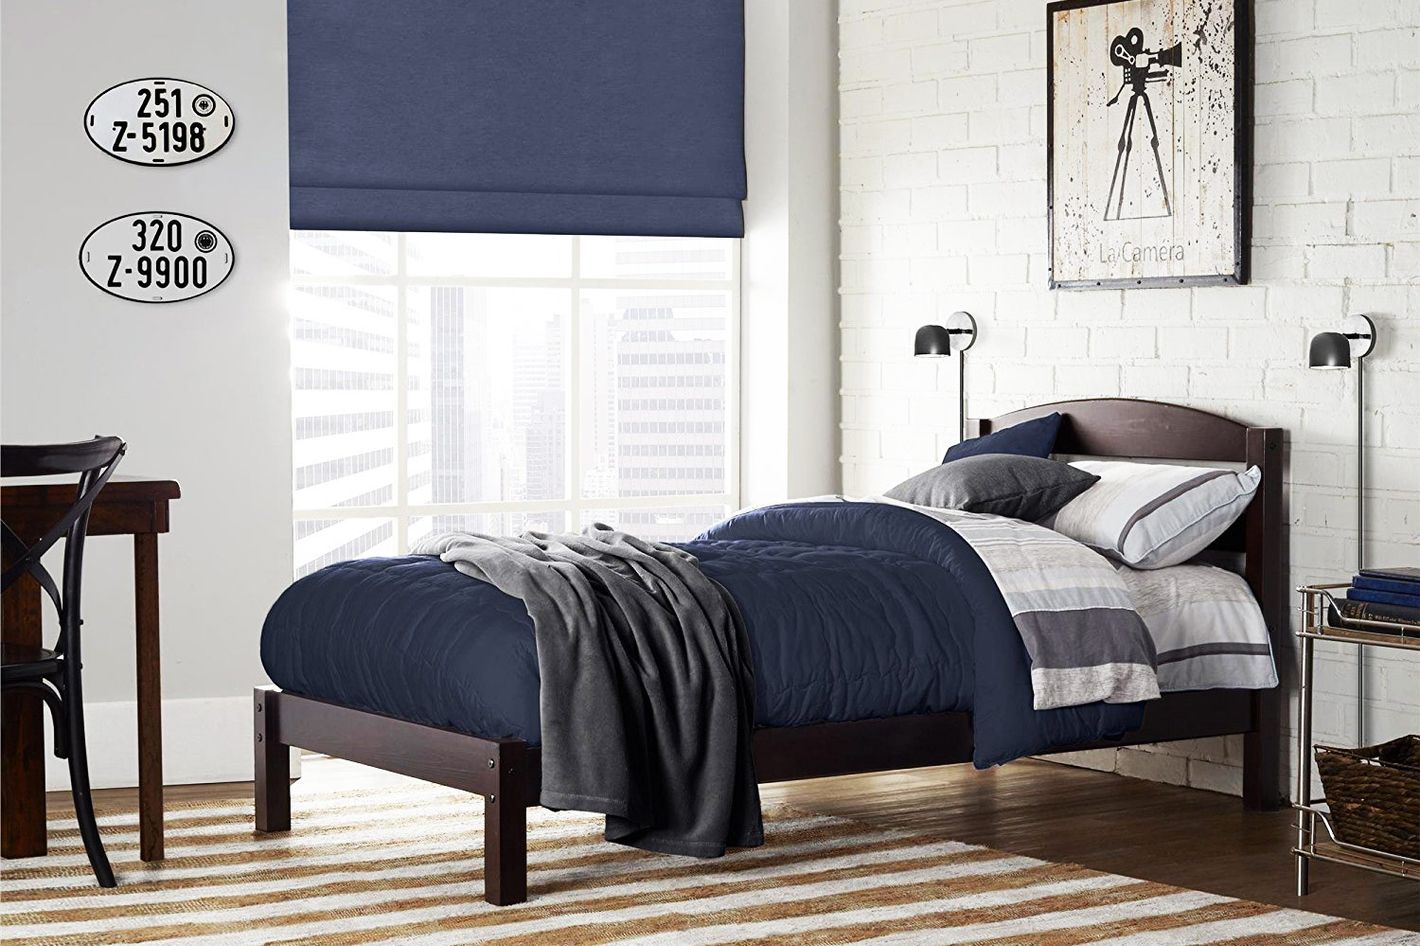 12 Best Twin Beds For Kids 2019, Twin Bed Sideboard